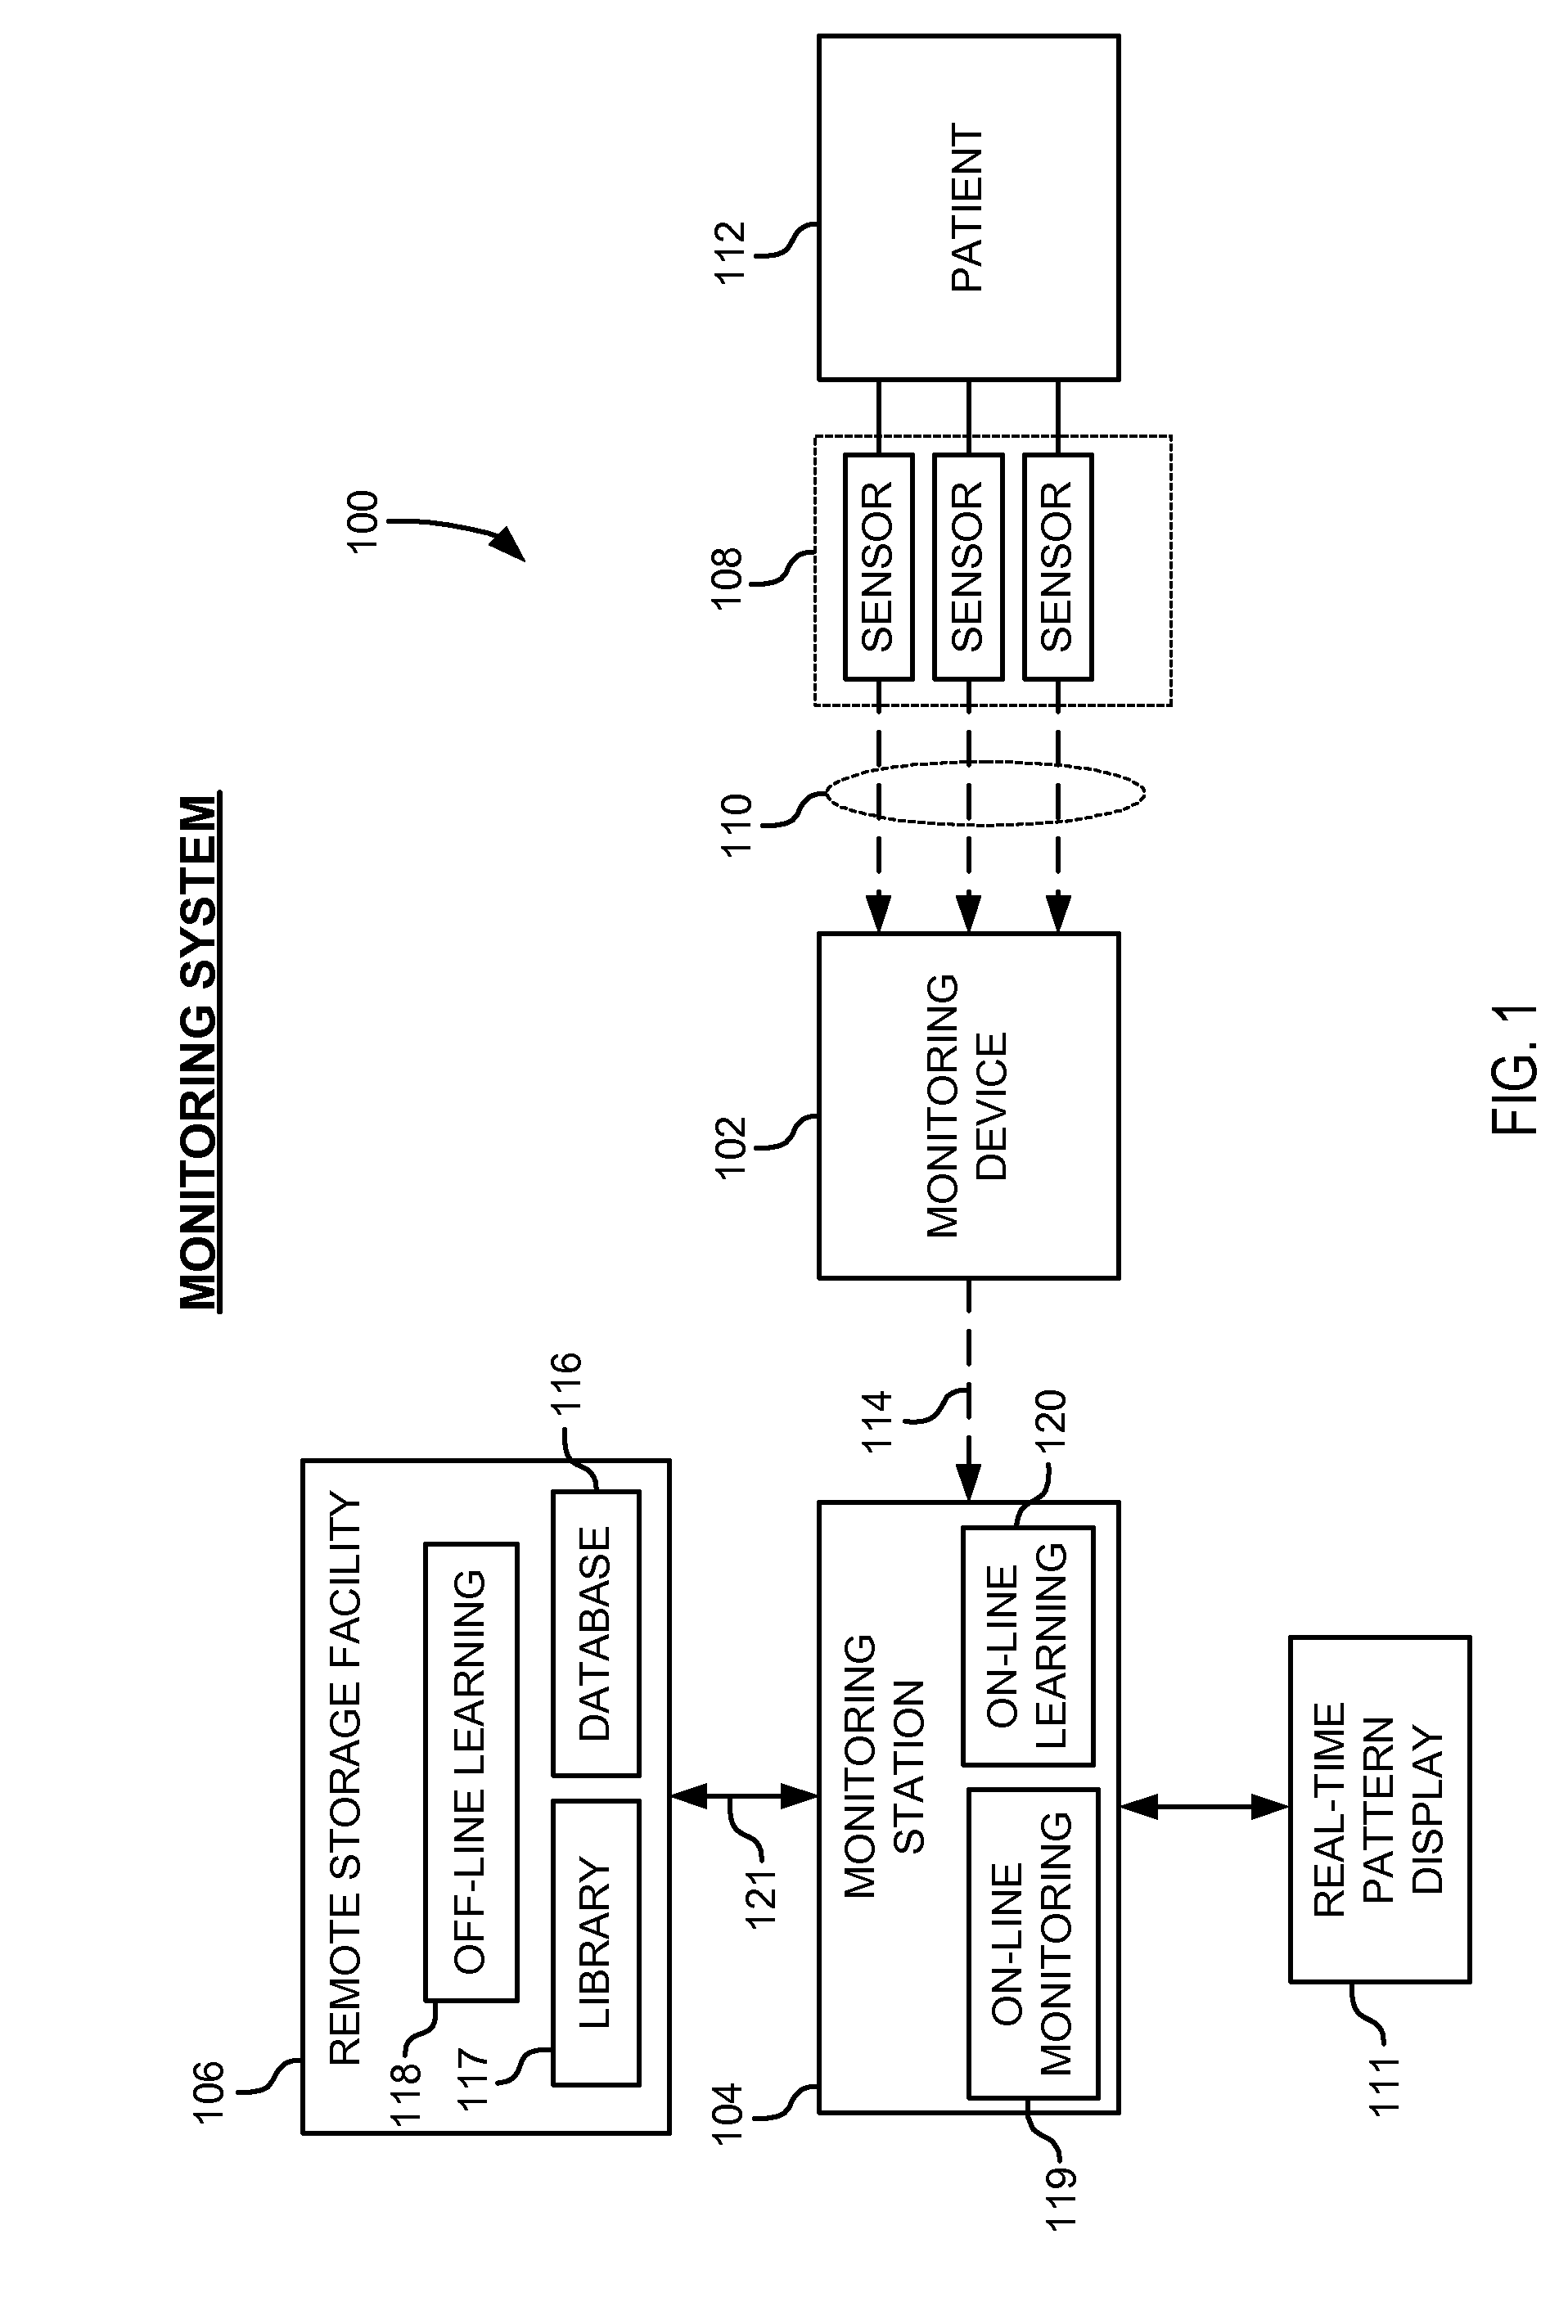 System and method of discovering, detecting and classifying alarm patterns for electrophysiological monitoring systems